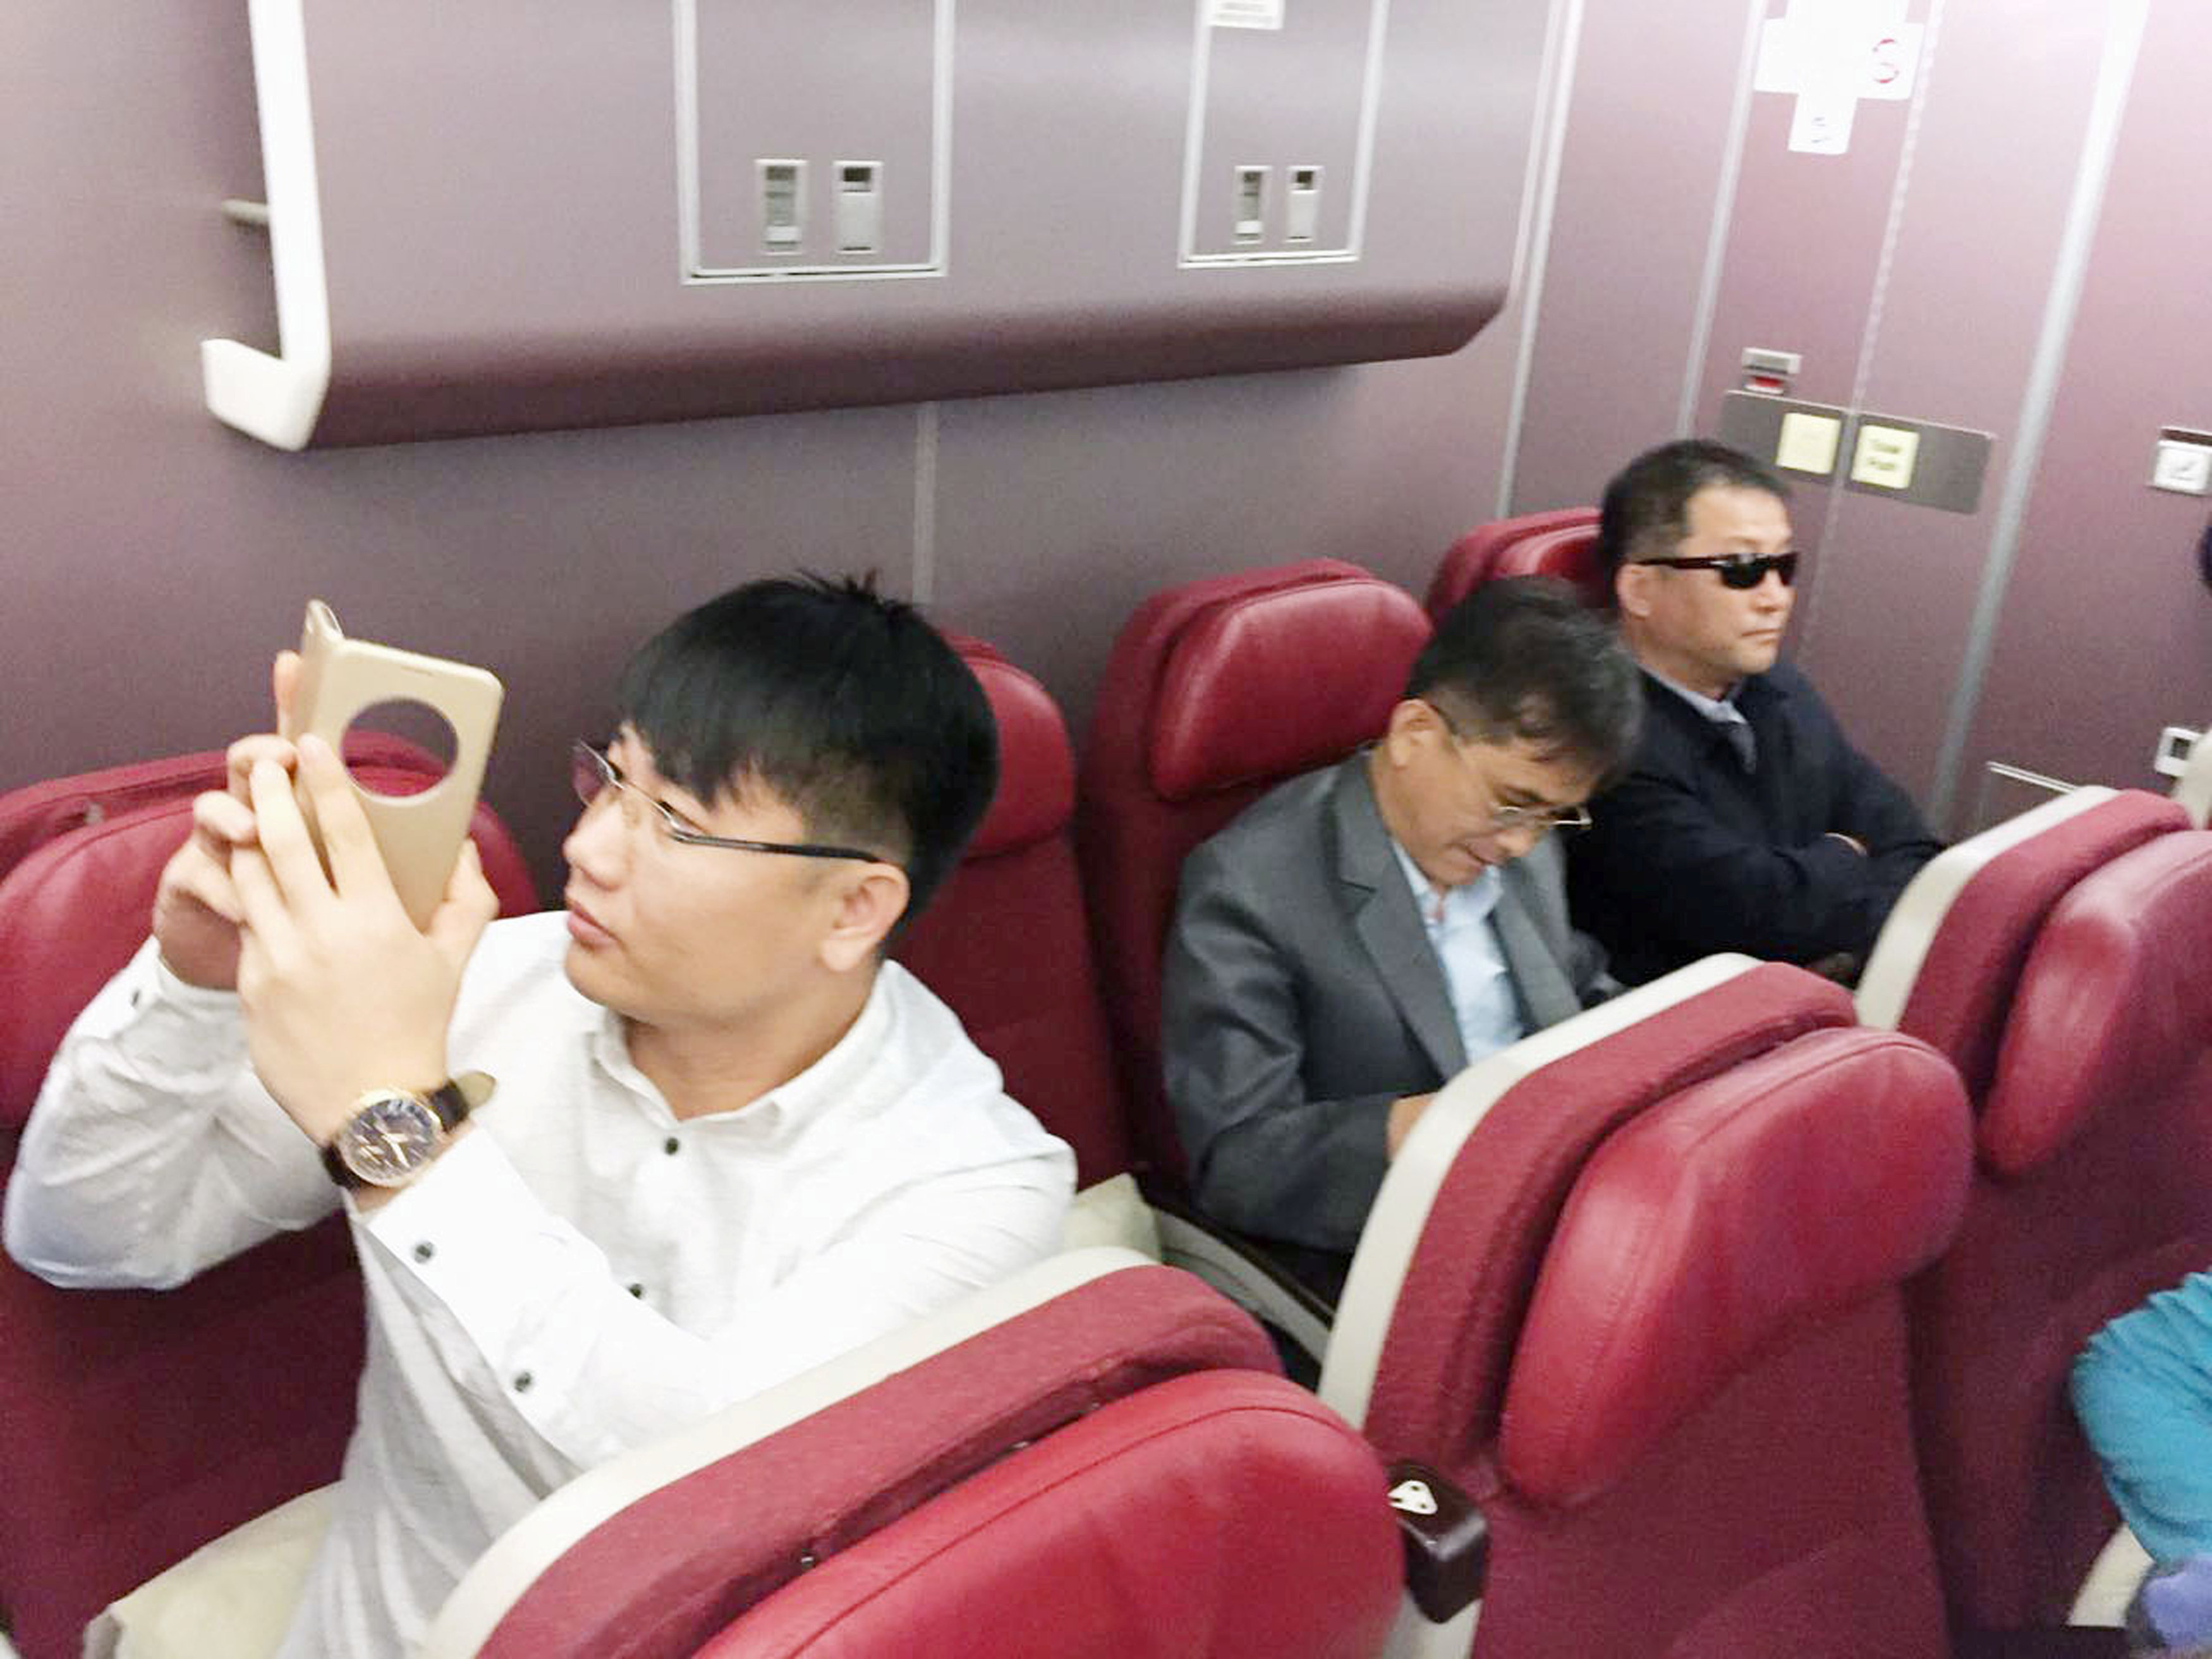 Passengers believed to be North Koreans including Kim Uk Il (L) are seen inside an airplane for the flight bound for Beijing, at an airport in Kuala Lumpur in Malaysia, in this photo taken by Kyodo March 30, 2017. Mandatory credit Kyodo/via REUTERS ATTENT